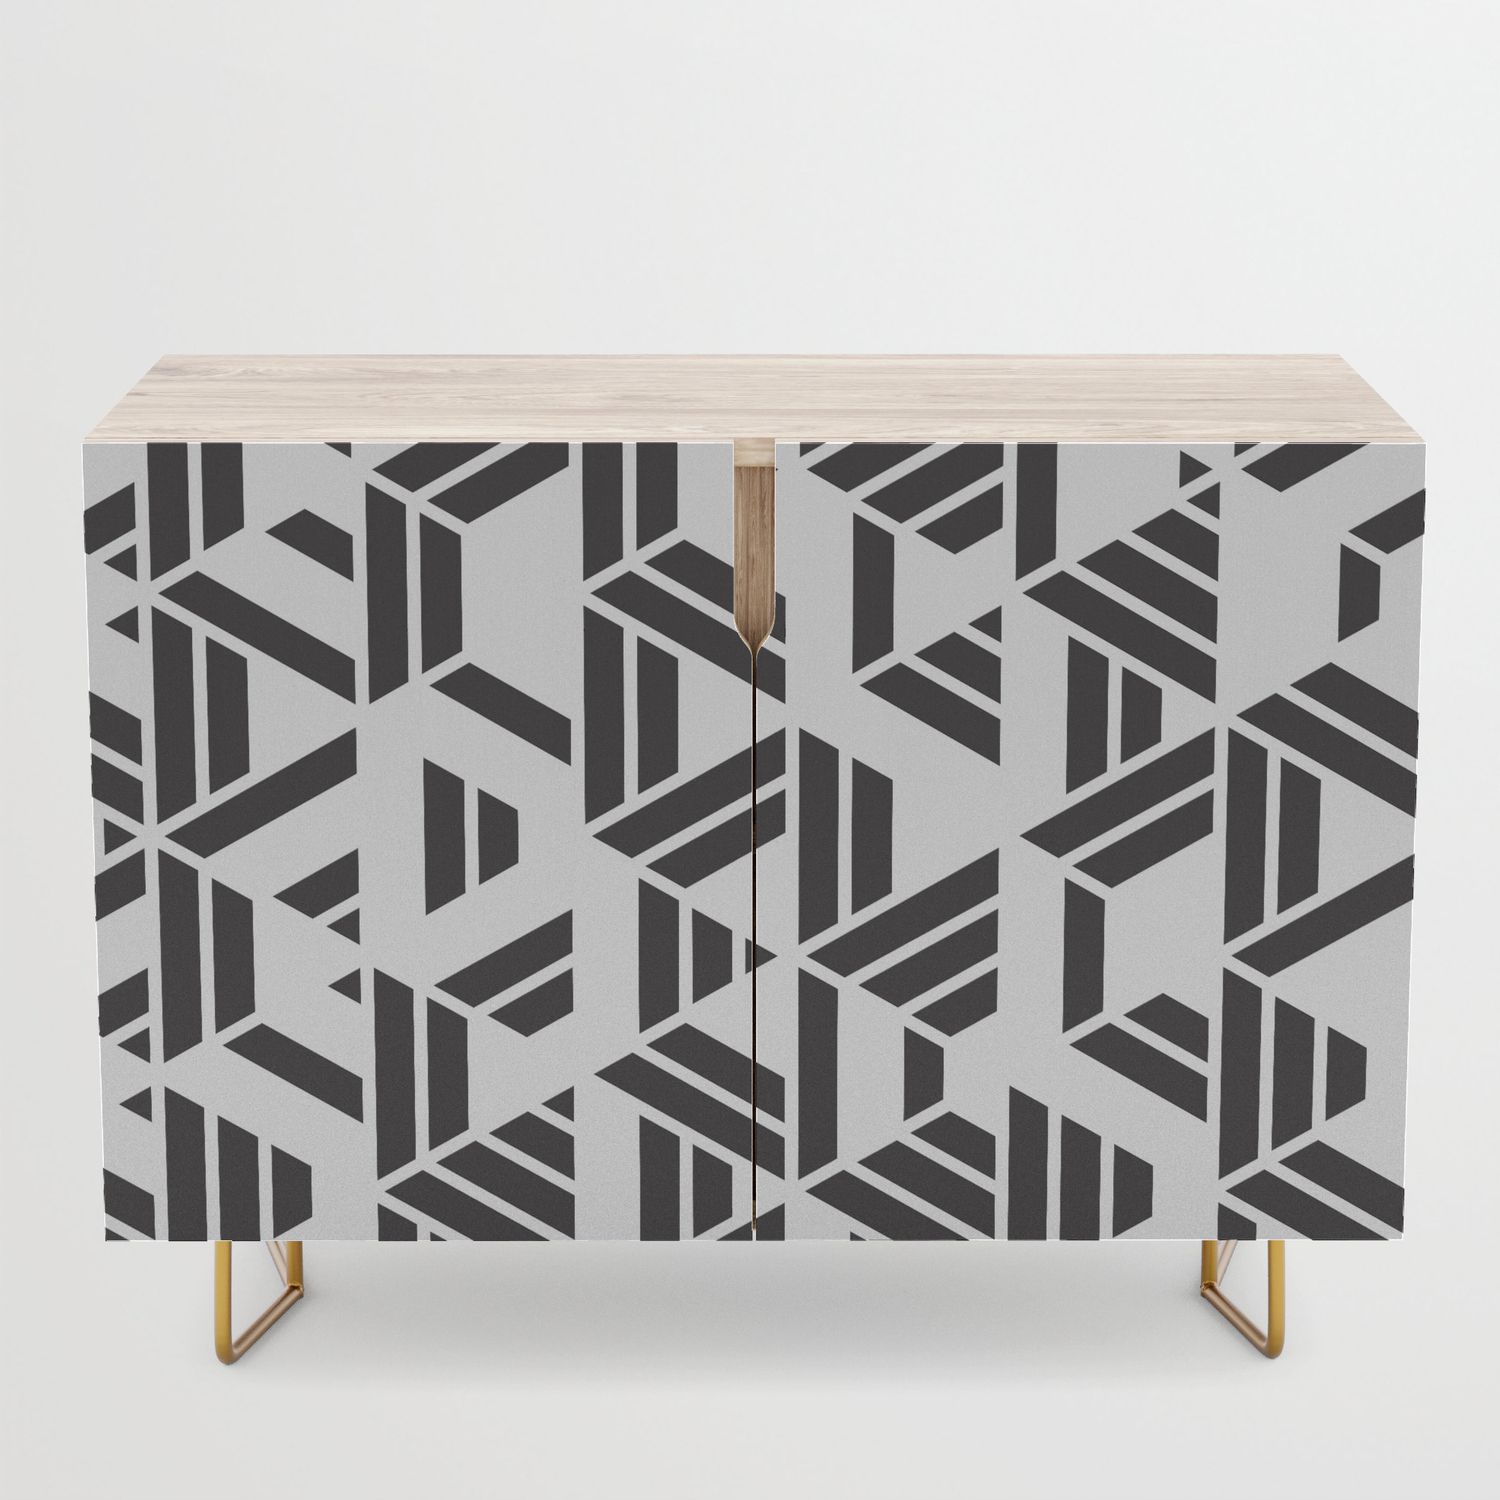 Black And White Hexagon Geometric Pattern Credenza Throughout Exagonal Geometry Credenzas (Gallery 1 of 20)